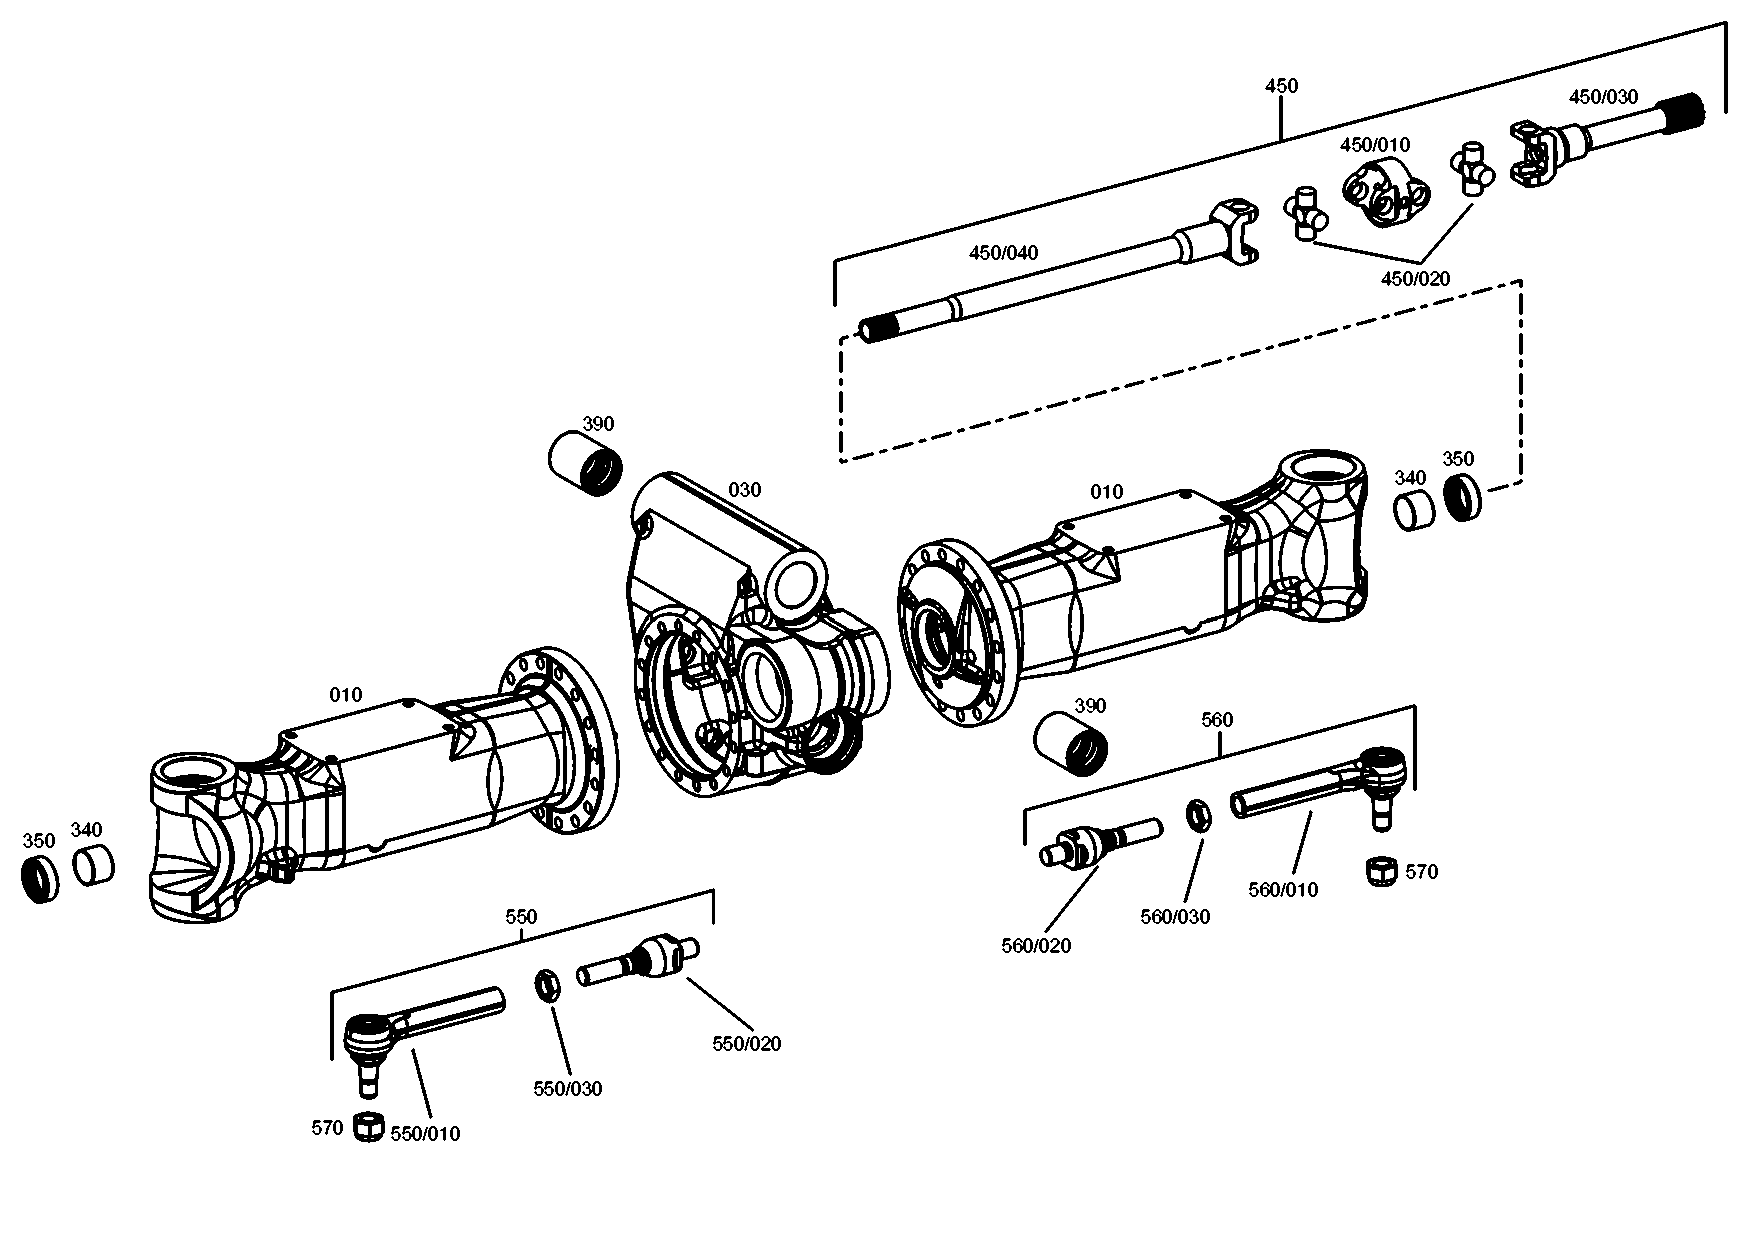 drawing for SENNEBOGEN HYDRAULIKBAGGER GMBH 125361 - AXLE CASING (figure 1)